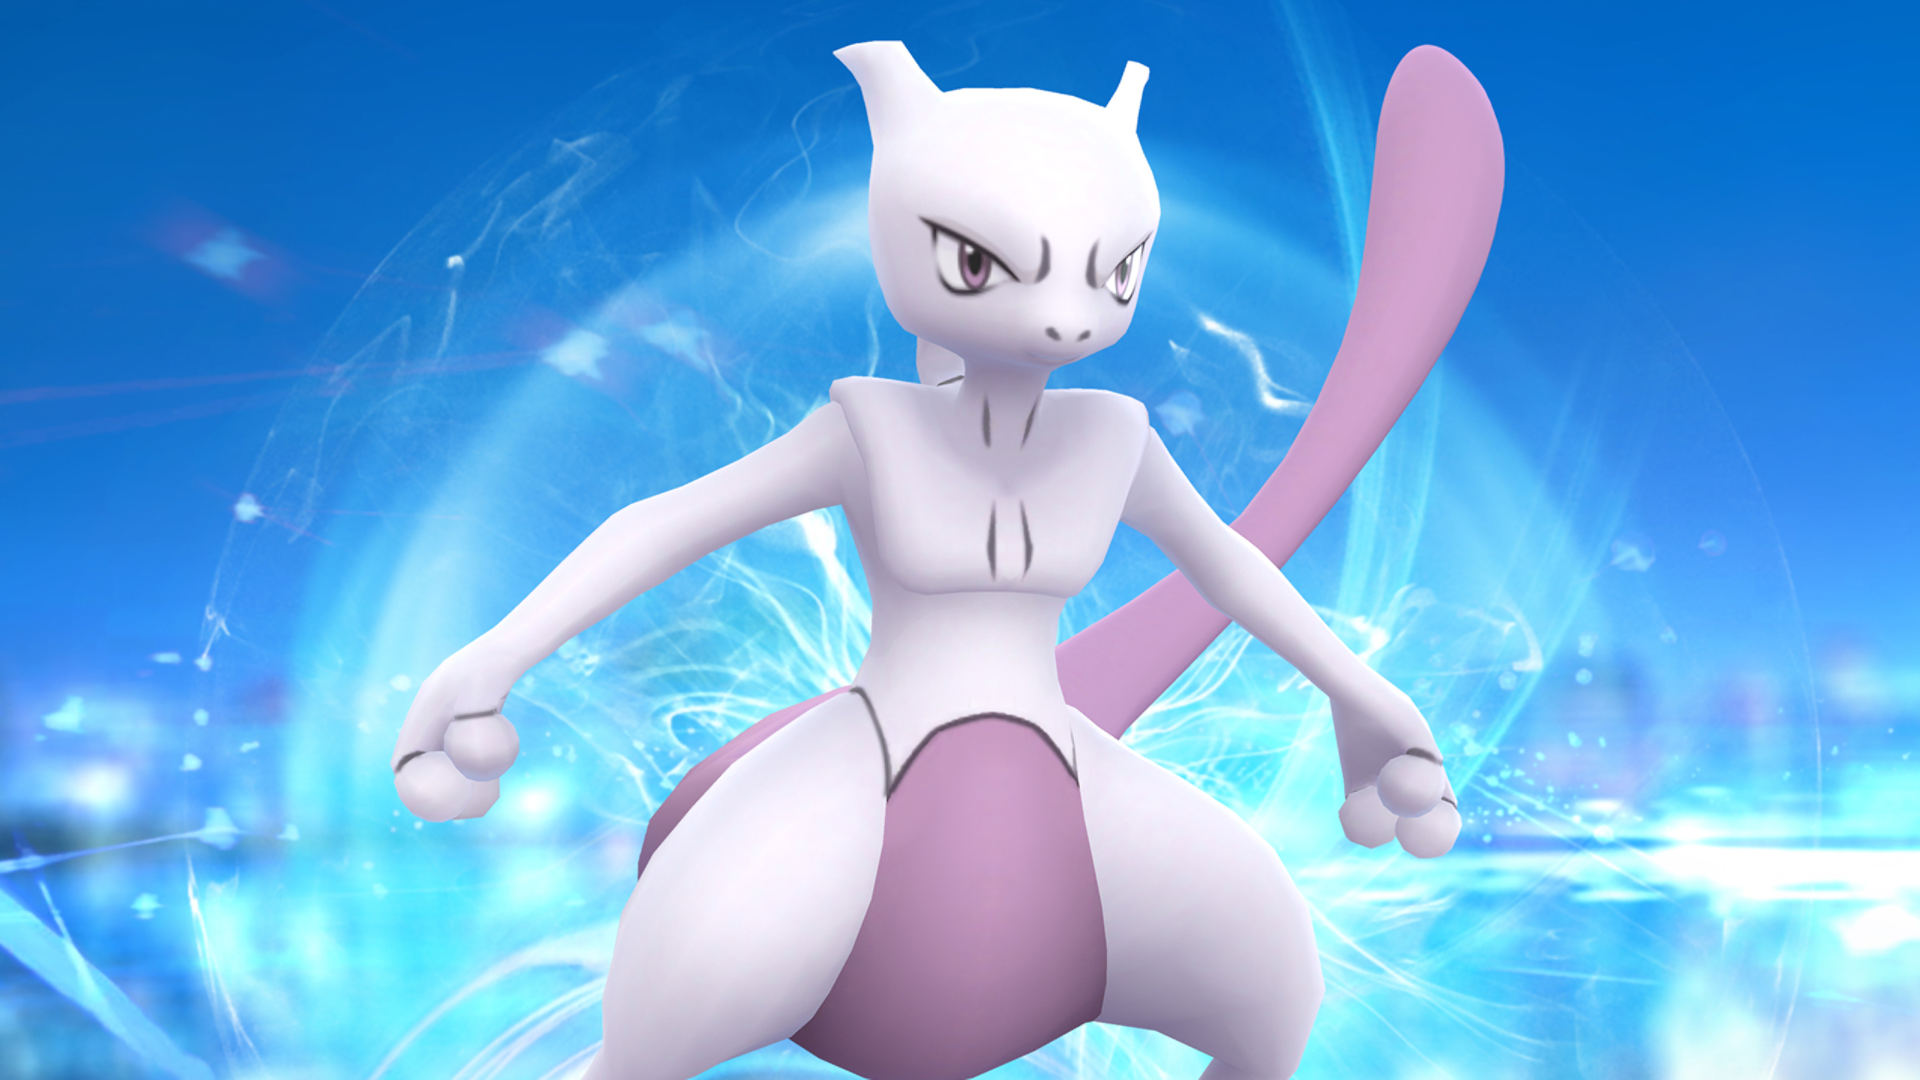 Pokemon Go's Mewtwo against a blue background